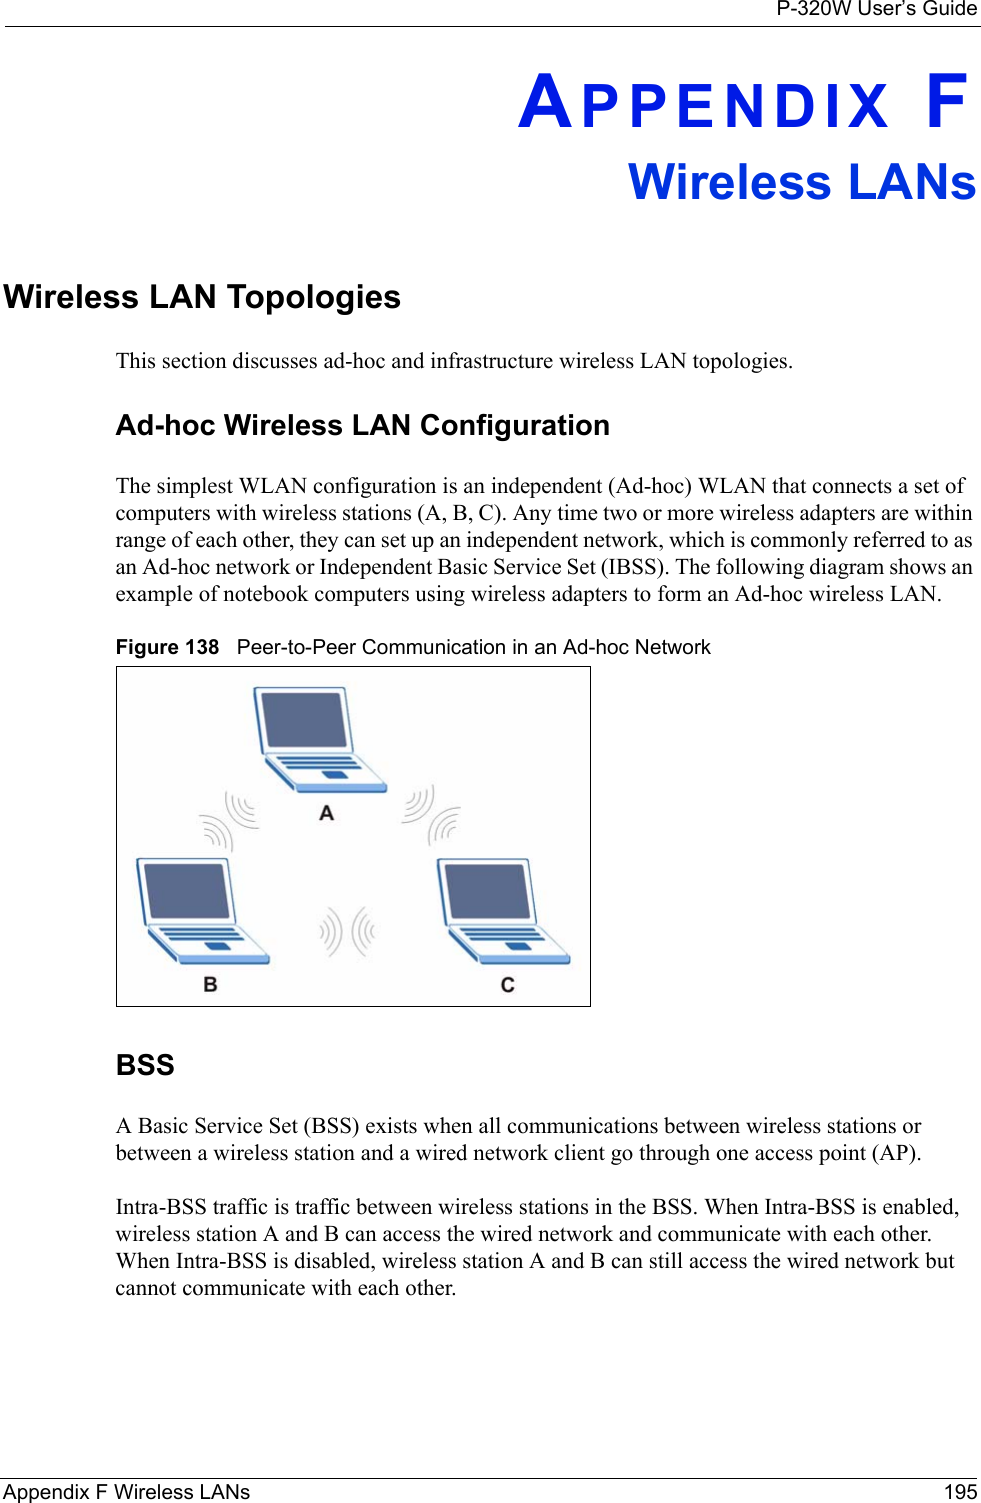 P-320W User’s GuideAppendix F Wireless LANs 195APPENDIX FWireless LANsWireless LAN TopologiesThis section discusses ad-hoc and infrastructure wireless LAN topologies.Ad-hoc Wireless LAN ConfigurationThe simplest WLAN configuration is an independent (Ad-hoc) WLAN that connects a set of computers with wireless stations (A, B, C). Any time two or more wireless adapters are within range of each other, they can set up an independent network, which is commonly referred to as an Ad-hoc network or Independent Basic Service Set (IBSS). The following diagram shows an example of notebook computers using wireless adapters to form an Ad-hoc wireless LAN. Figure 138   Peer-to-Peer Communication in an Ad-hoc NetworkBSSA Basic Service Set (BSS) exists when all communications between wireless stations or between a wireless station and a wired network client go through one access point (AP). Intra-BSS traffic is traffic between wireless stations in the BSS. When Intra-BSS is enabled, wireless station A and B can access the wired network and communicate with each other. When Intra-BSS is disabled, wireless station A and B can still access the wired network but cannot communicate with each other.